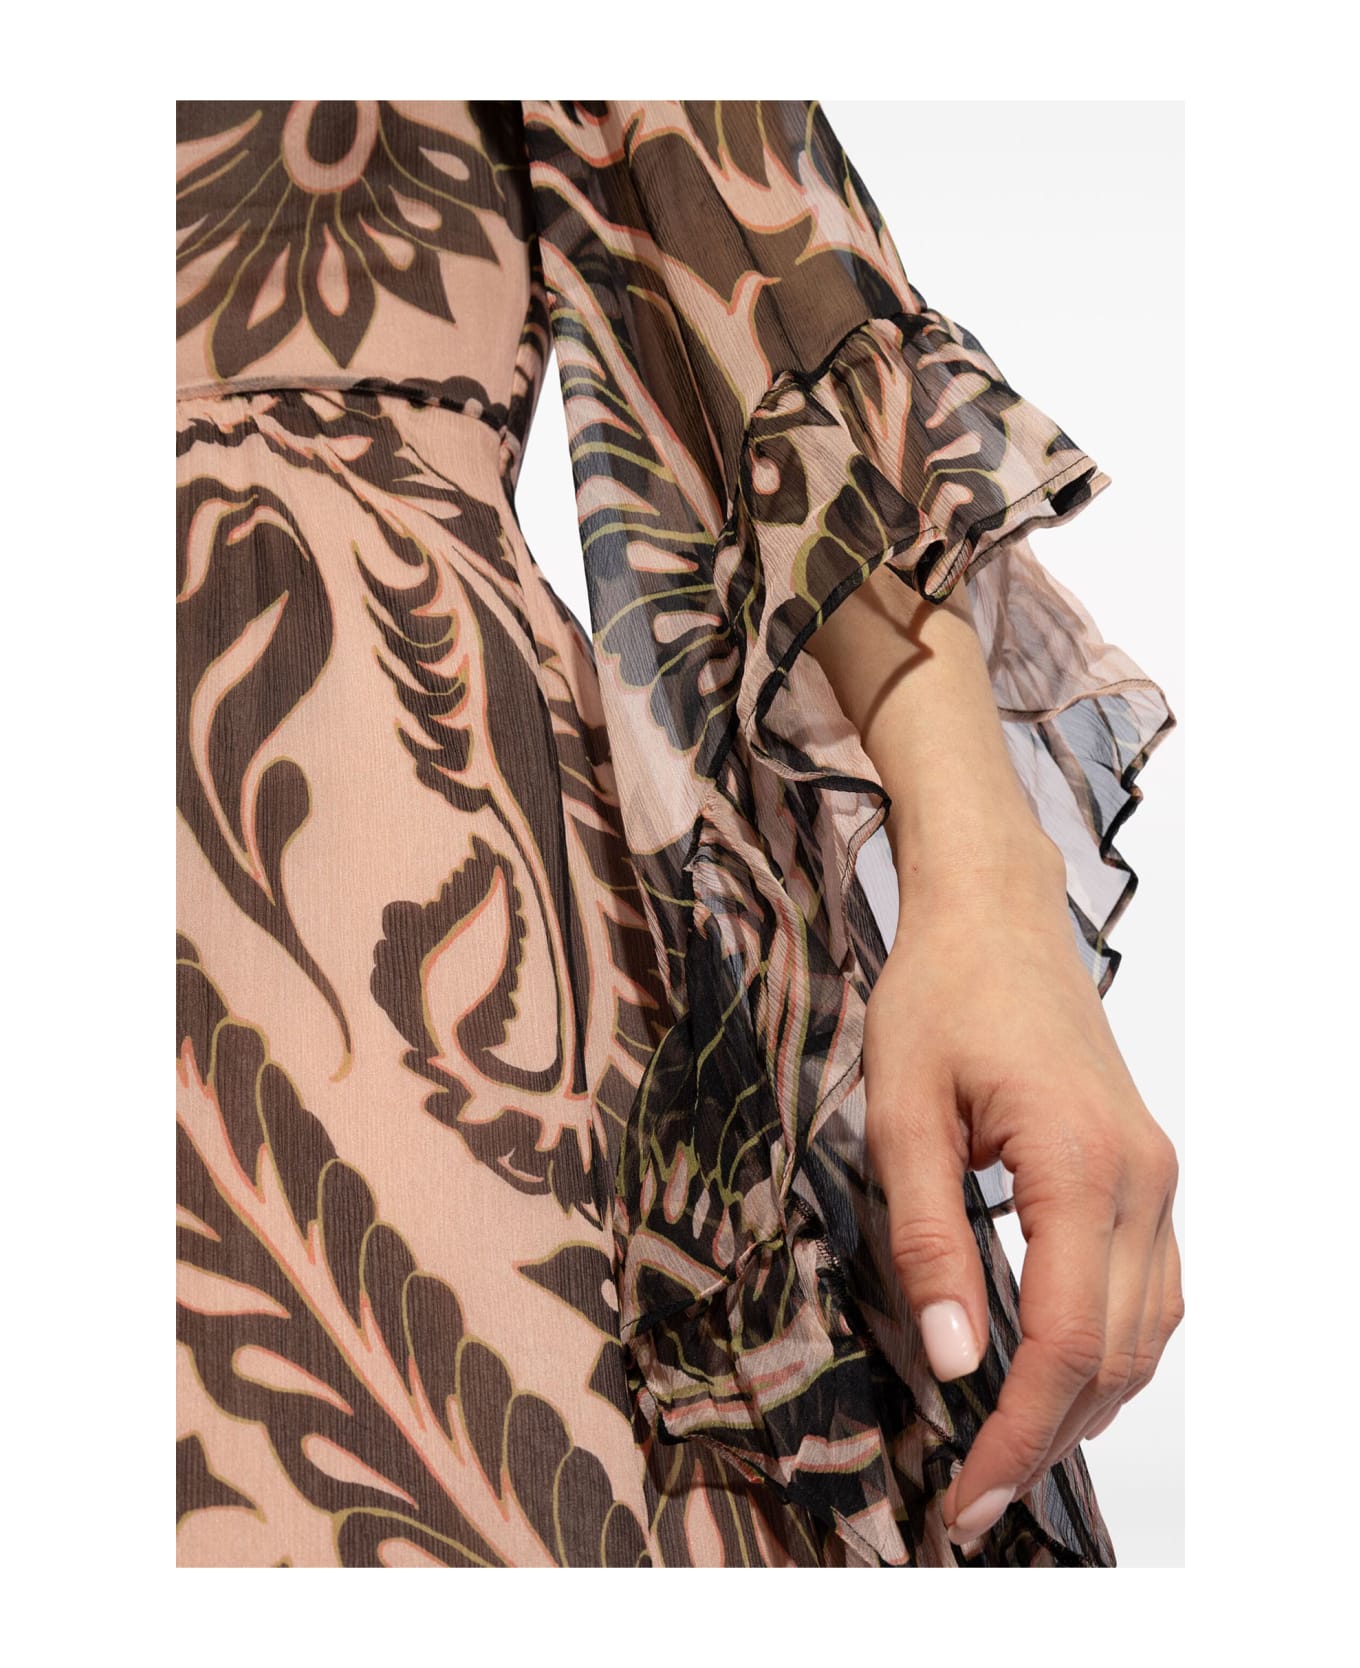 Etro Printed Silk Dress With Ruching - Brown